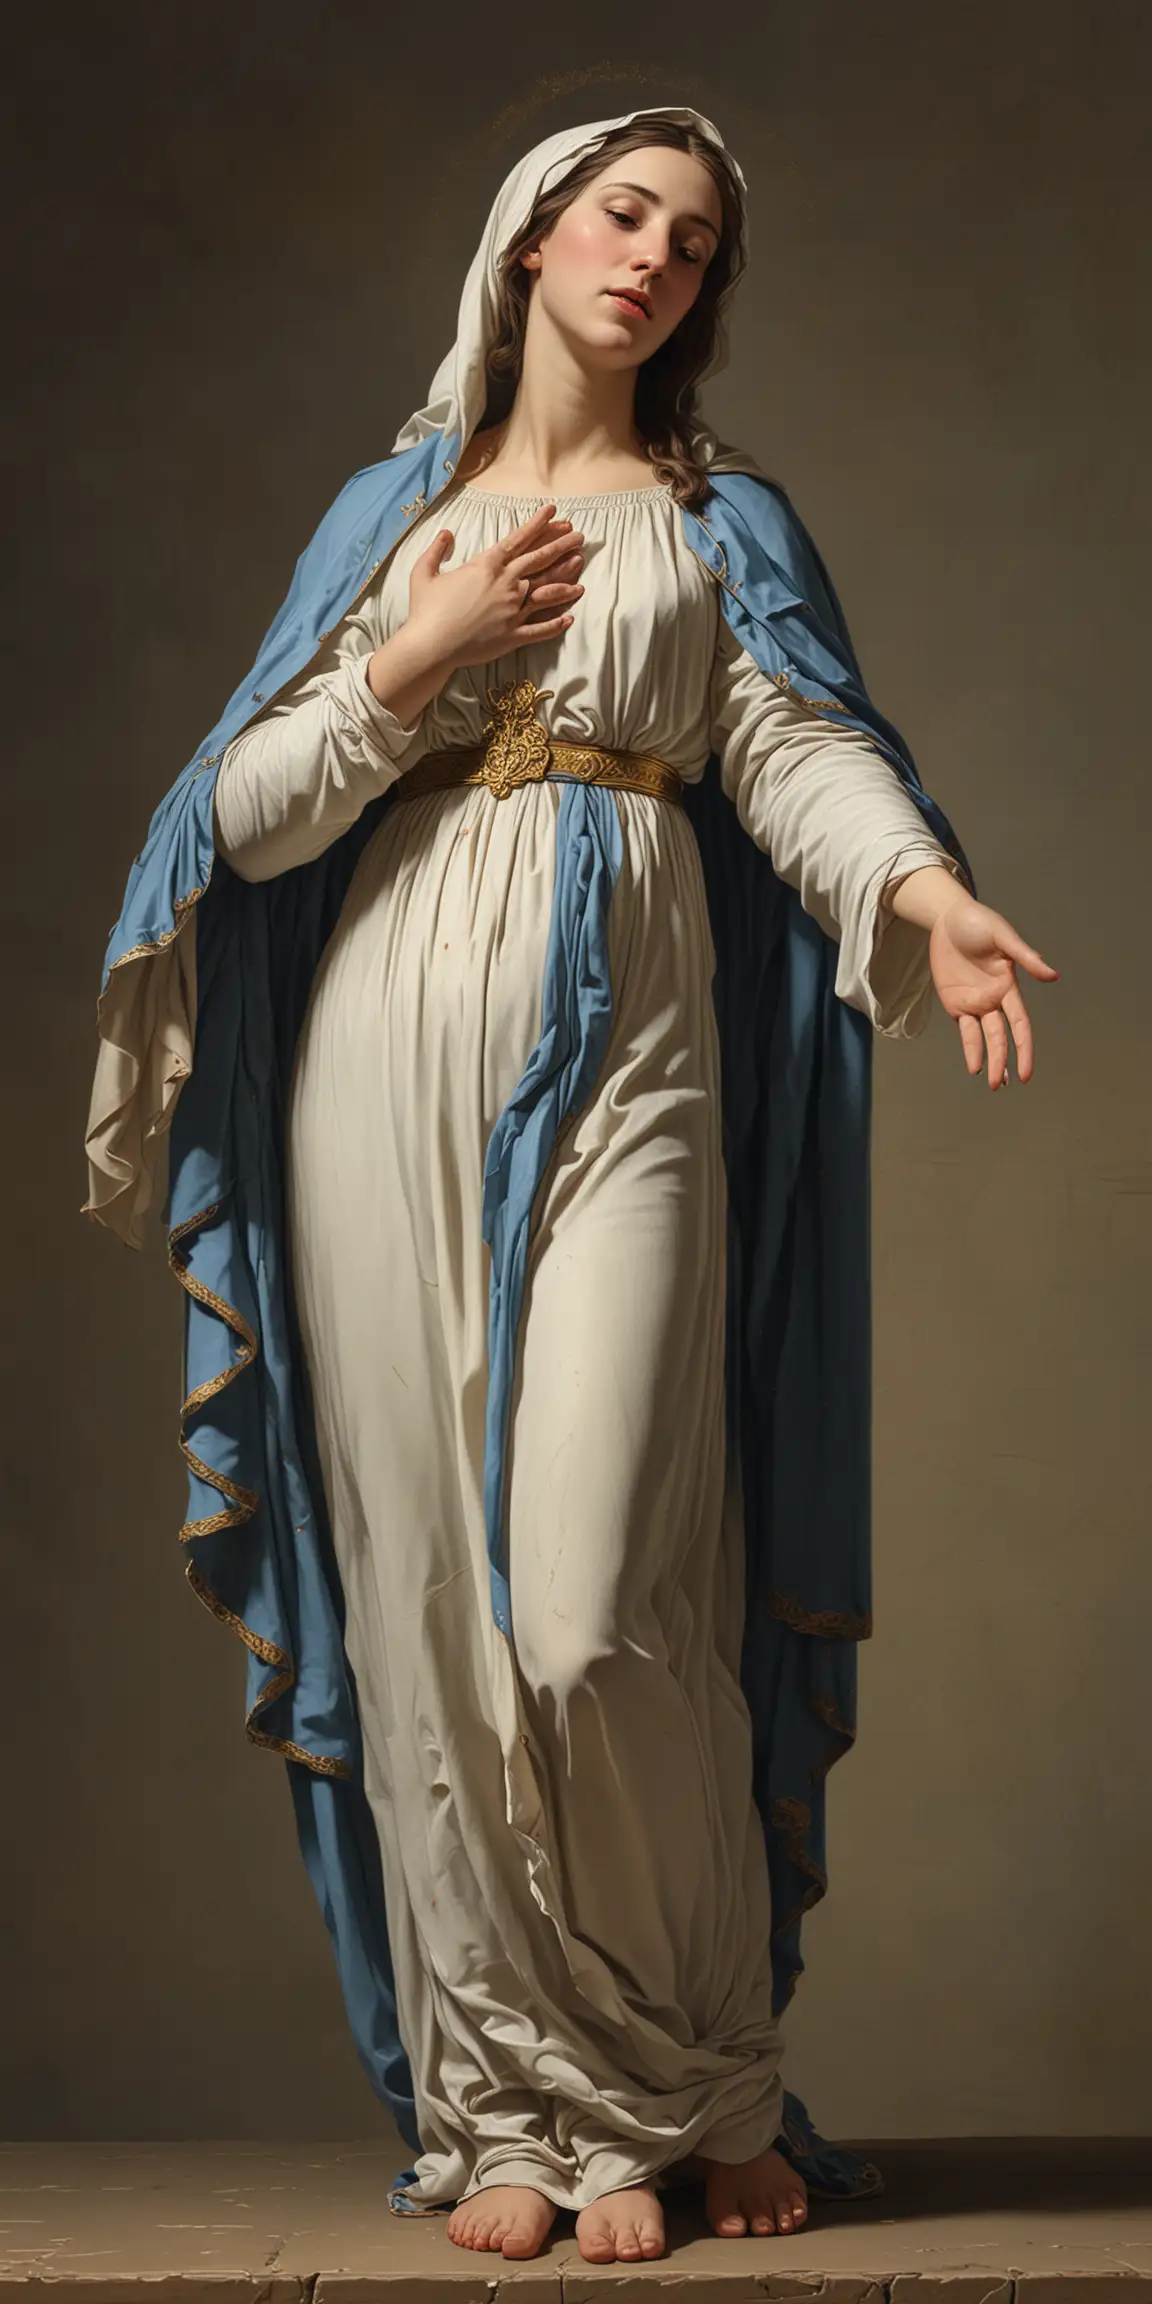 A full-figure painting rendered in the style of French artist Jacques-Louis David showing the side-view of the beautiful Virgin Mary with her clasped hands looking upwards